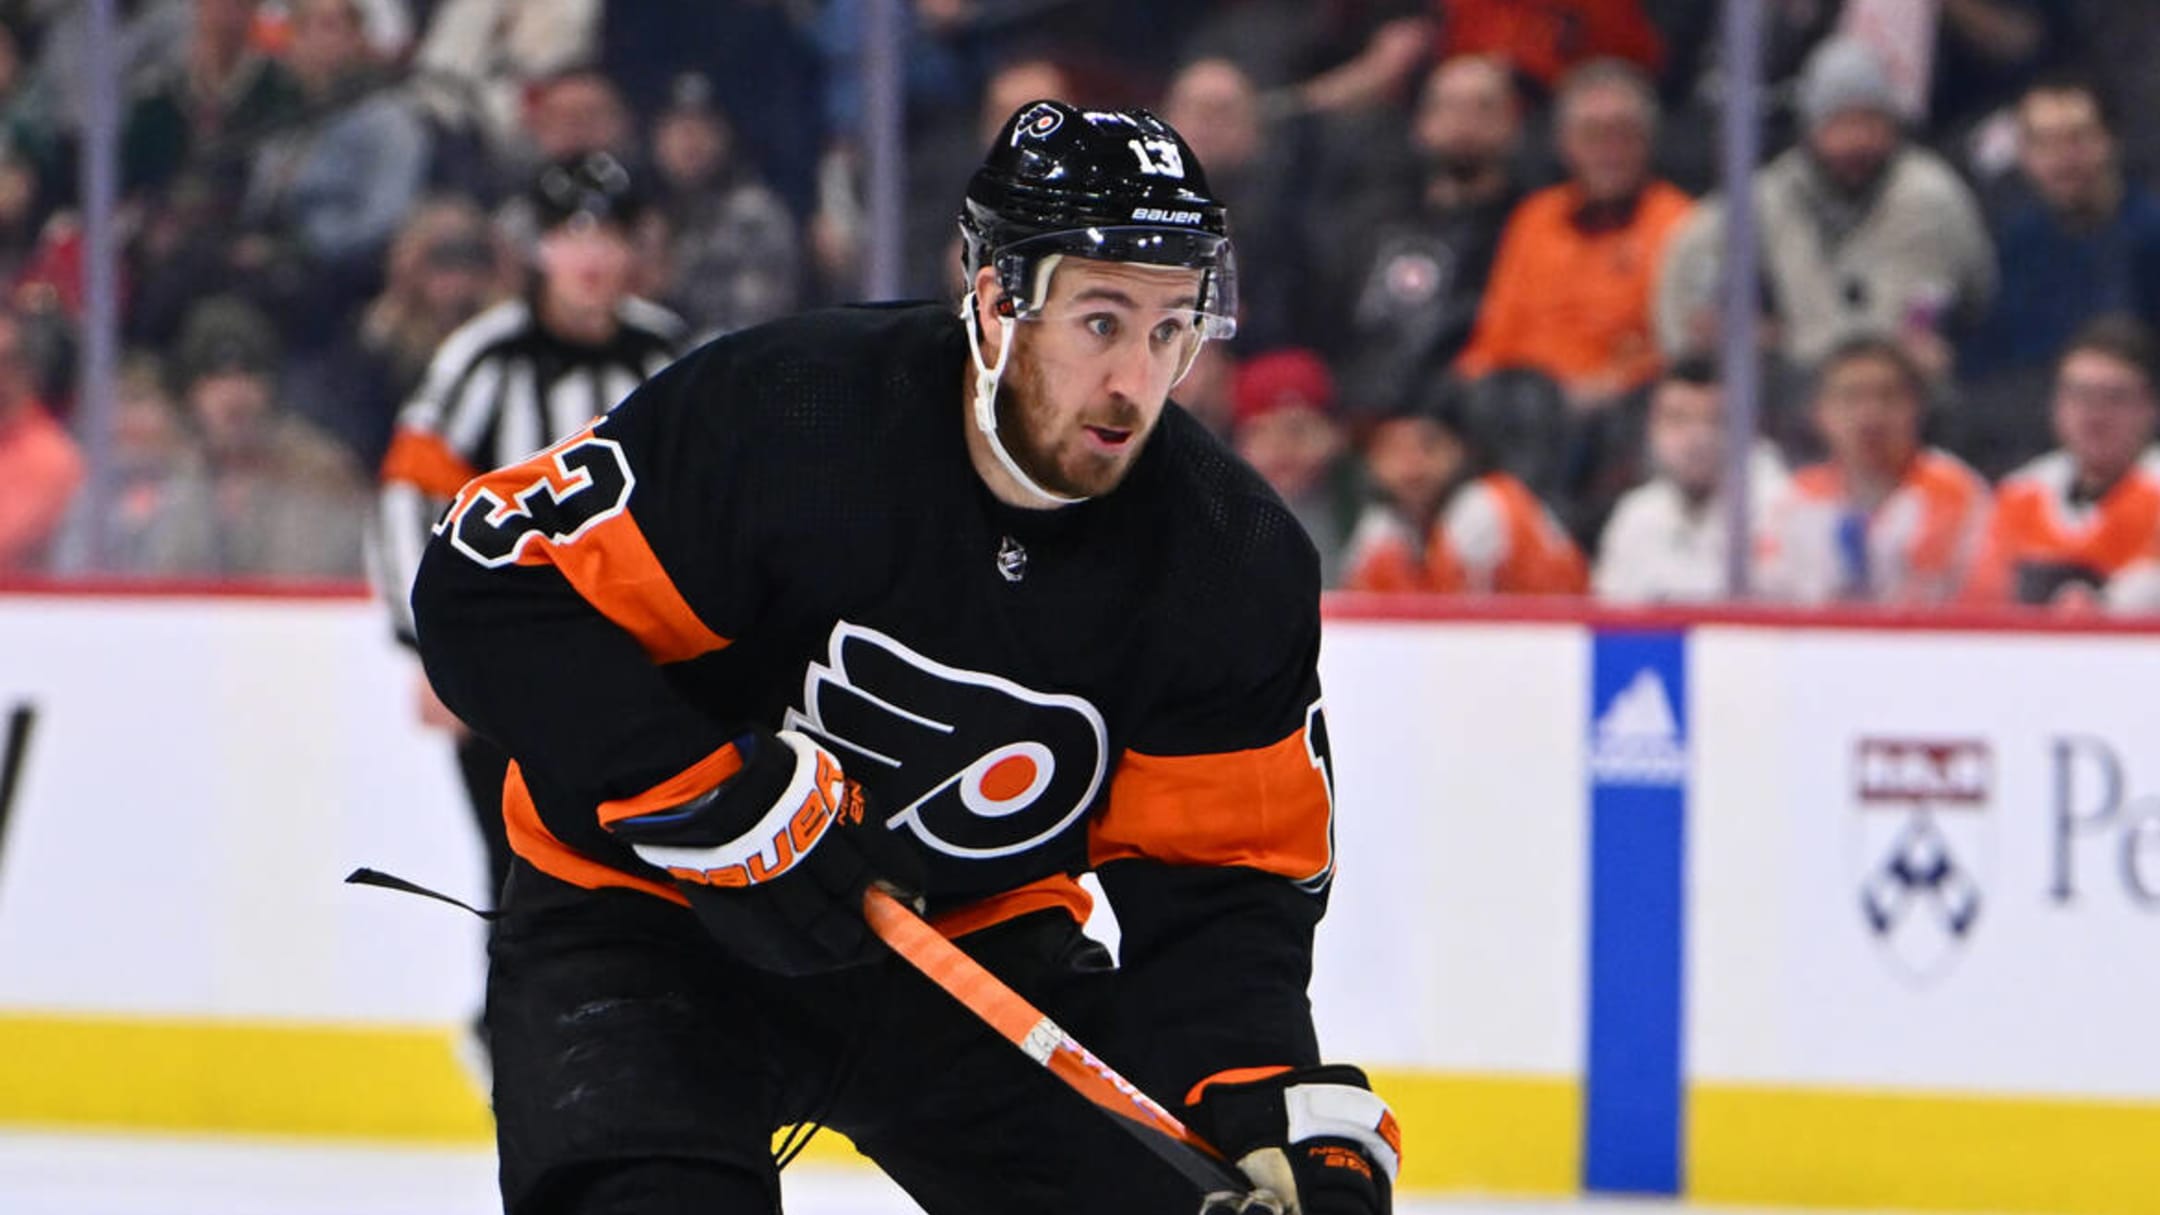 Flyers' Kevin Hayes pays tribute to Jimmy Hayes after brother's death